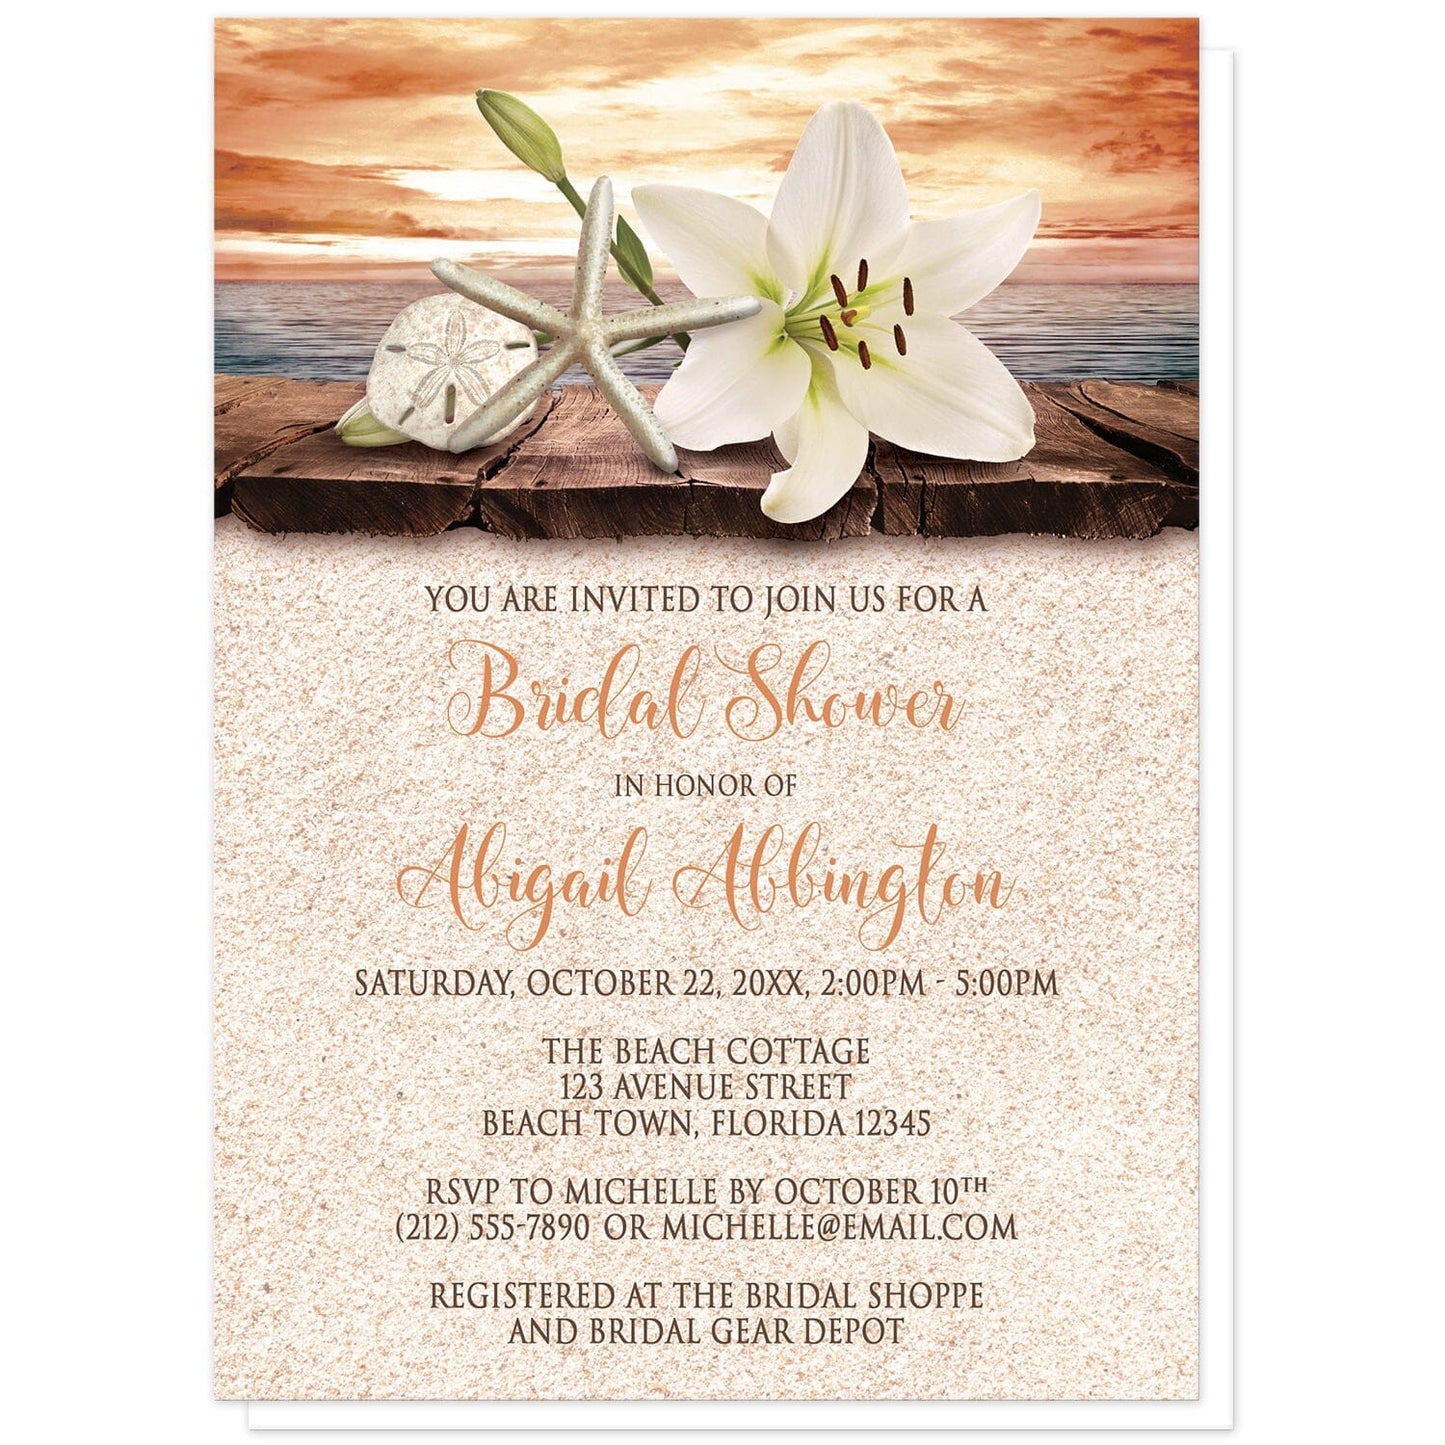 Lily Seashells and Sand Autumn Beach Bridal Shower Invitations at Artistically Invited. Lily seashells and sand autumn beach bridal shower invitations with an elegant white lily, a starfish, and a sand dollar on a rustic wood dock overlooking the open water under an orange sunset sky. Your personalized bridal shower celebration details are custom printed in dark brown and orange over a beige sand background design. 